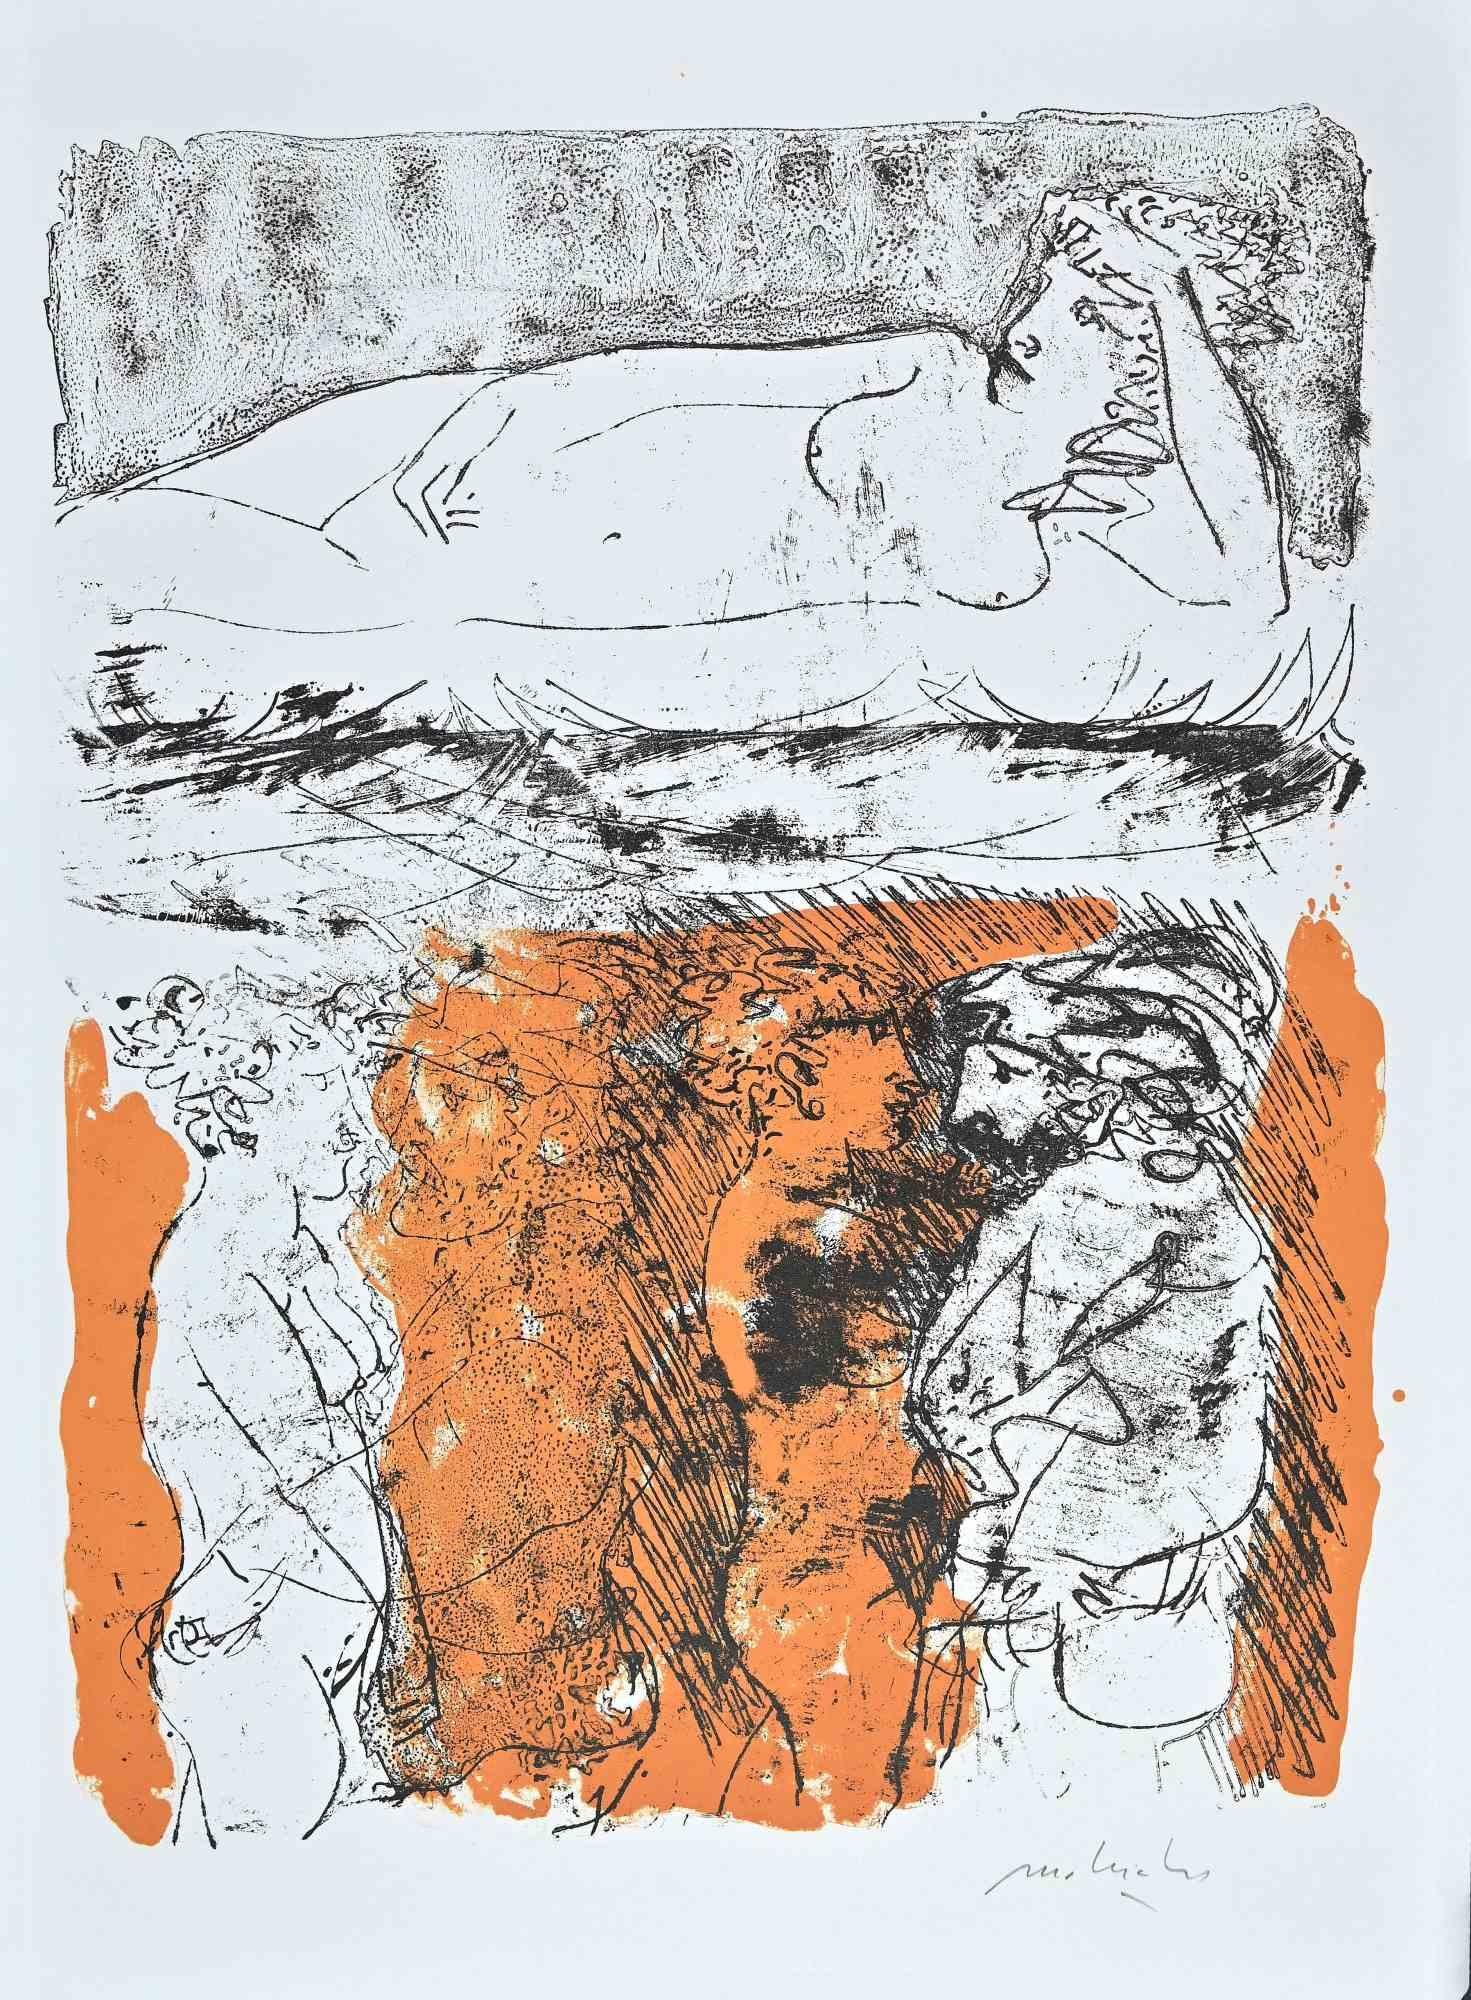 Lovers and Nude is an etching and aquatint on paper realized by  Carlo Mattioli in the 1970s.

Hand-signed on the lower.

Very good conditions.

The artwork is expressed through deft strokes with minimalistic colors applied in a harmonious manner,